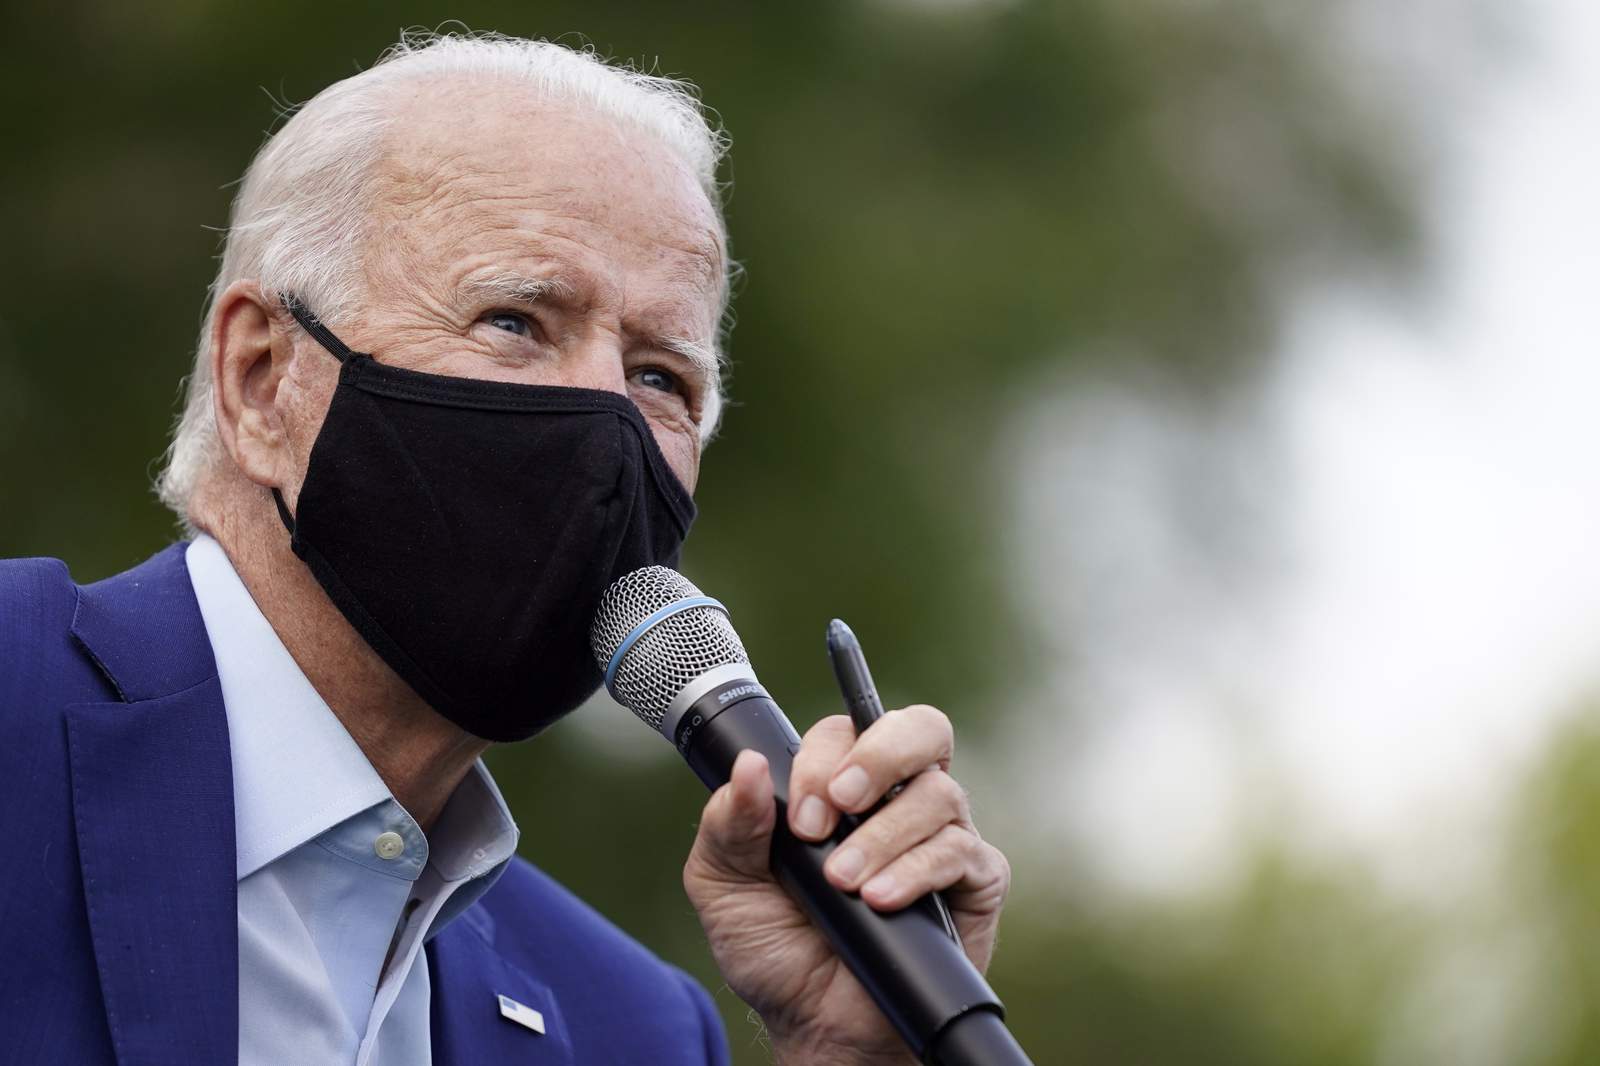 Biden: 'I hope I don't take the bait' in debate with Trump